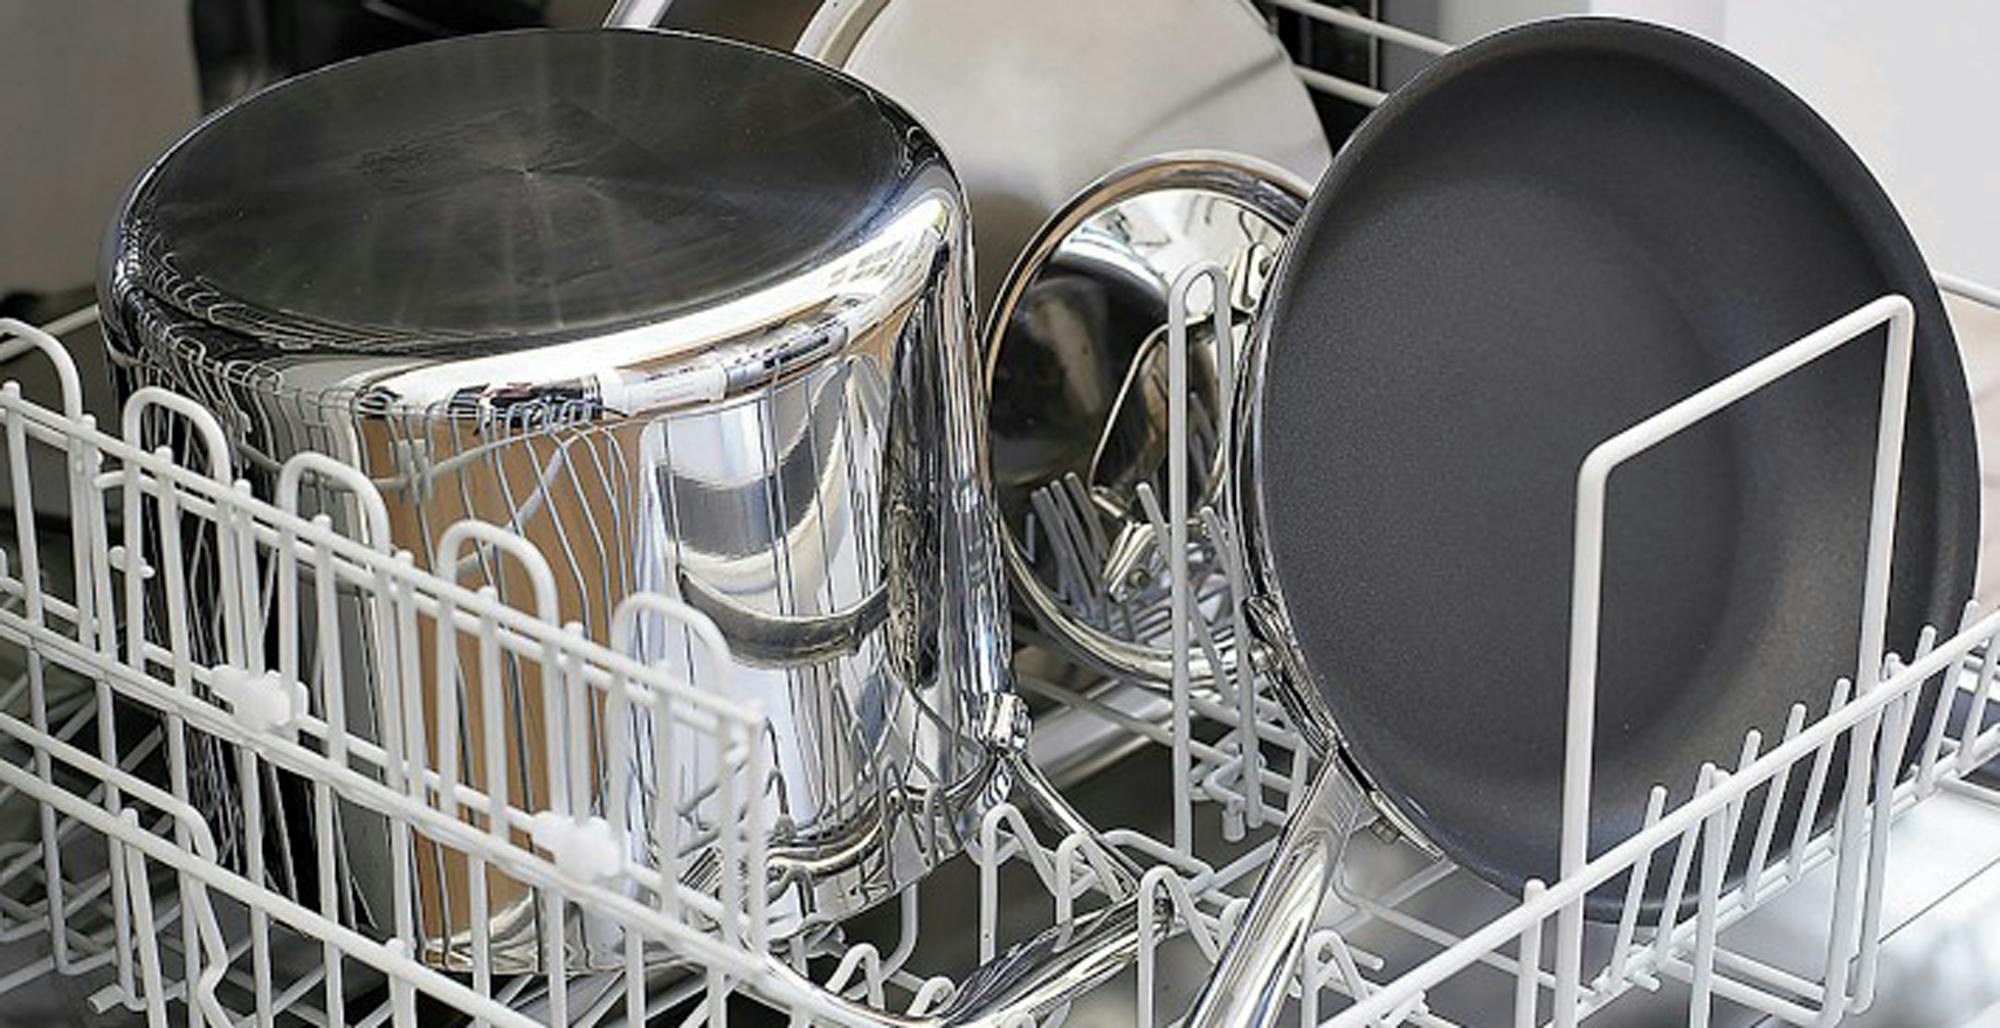 Get Up to $600 in the All-Clad Cookware Settlement